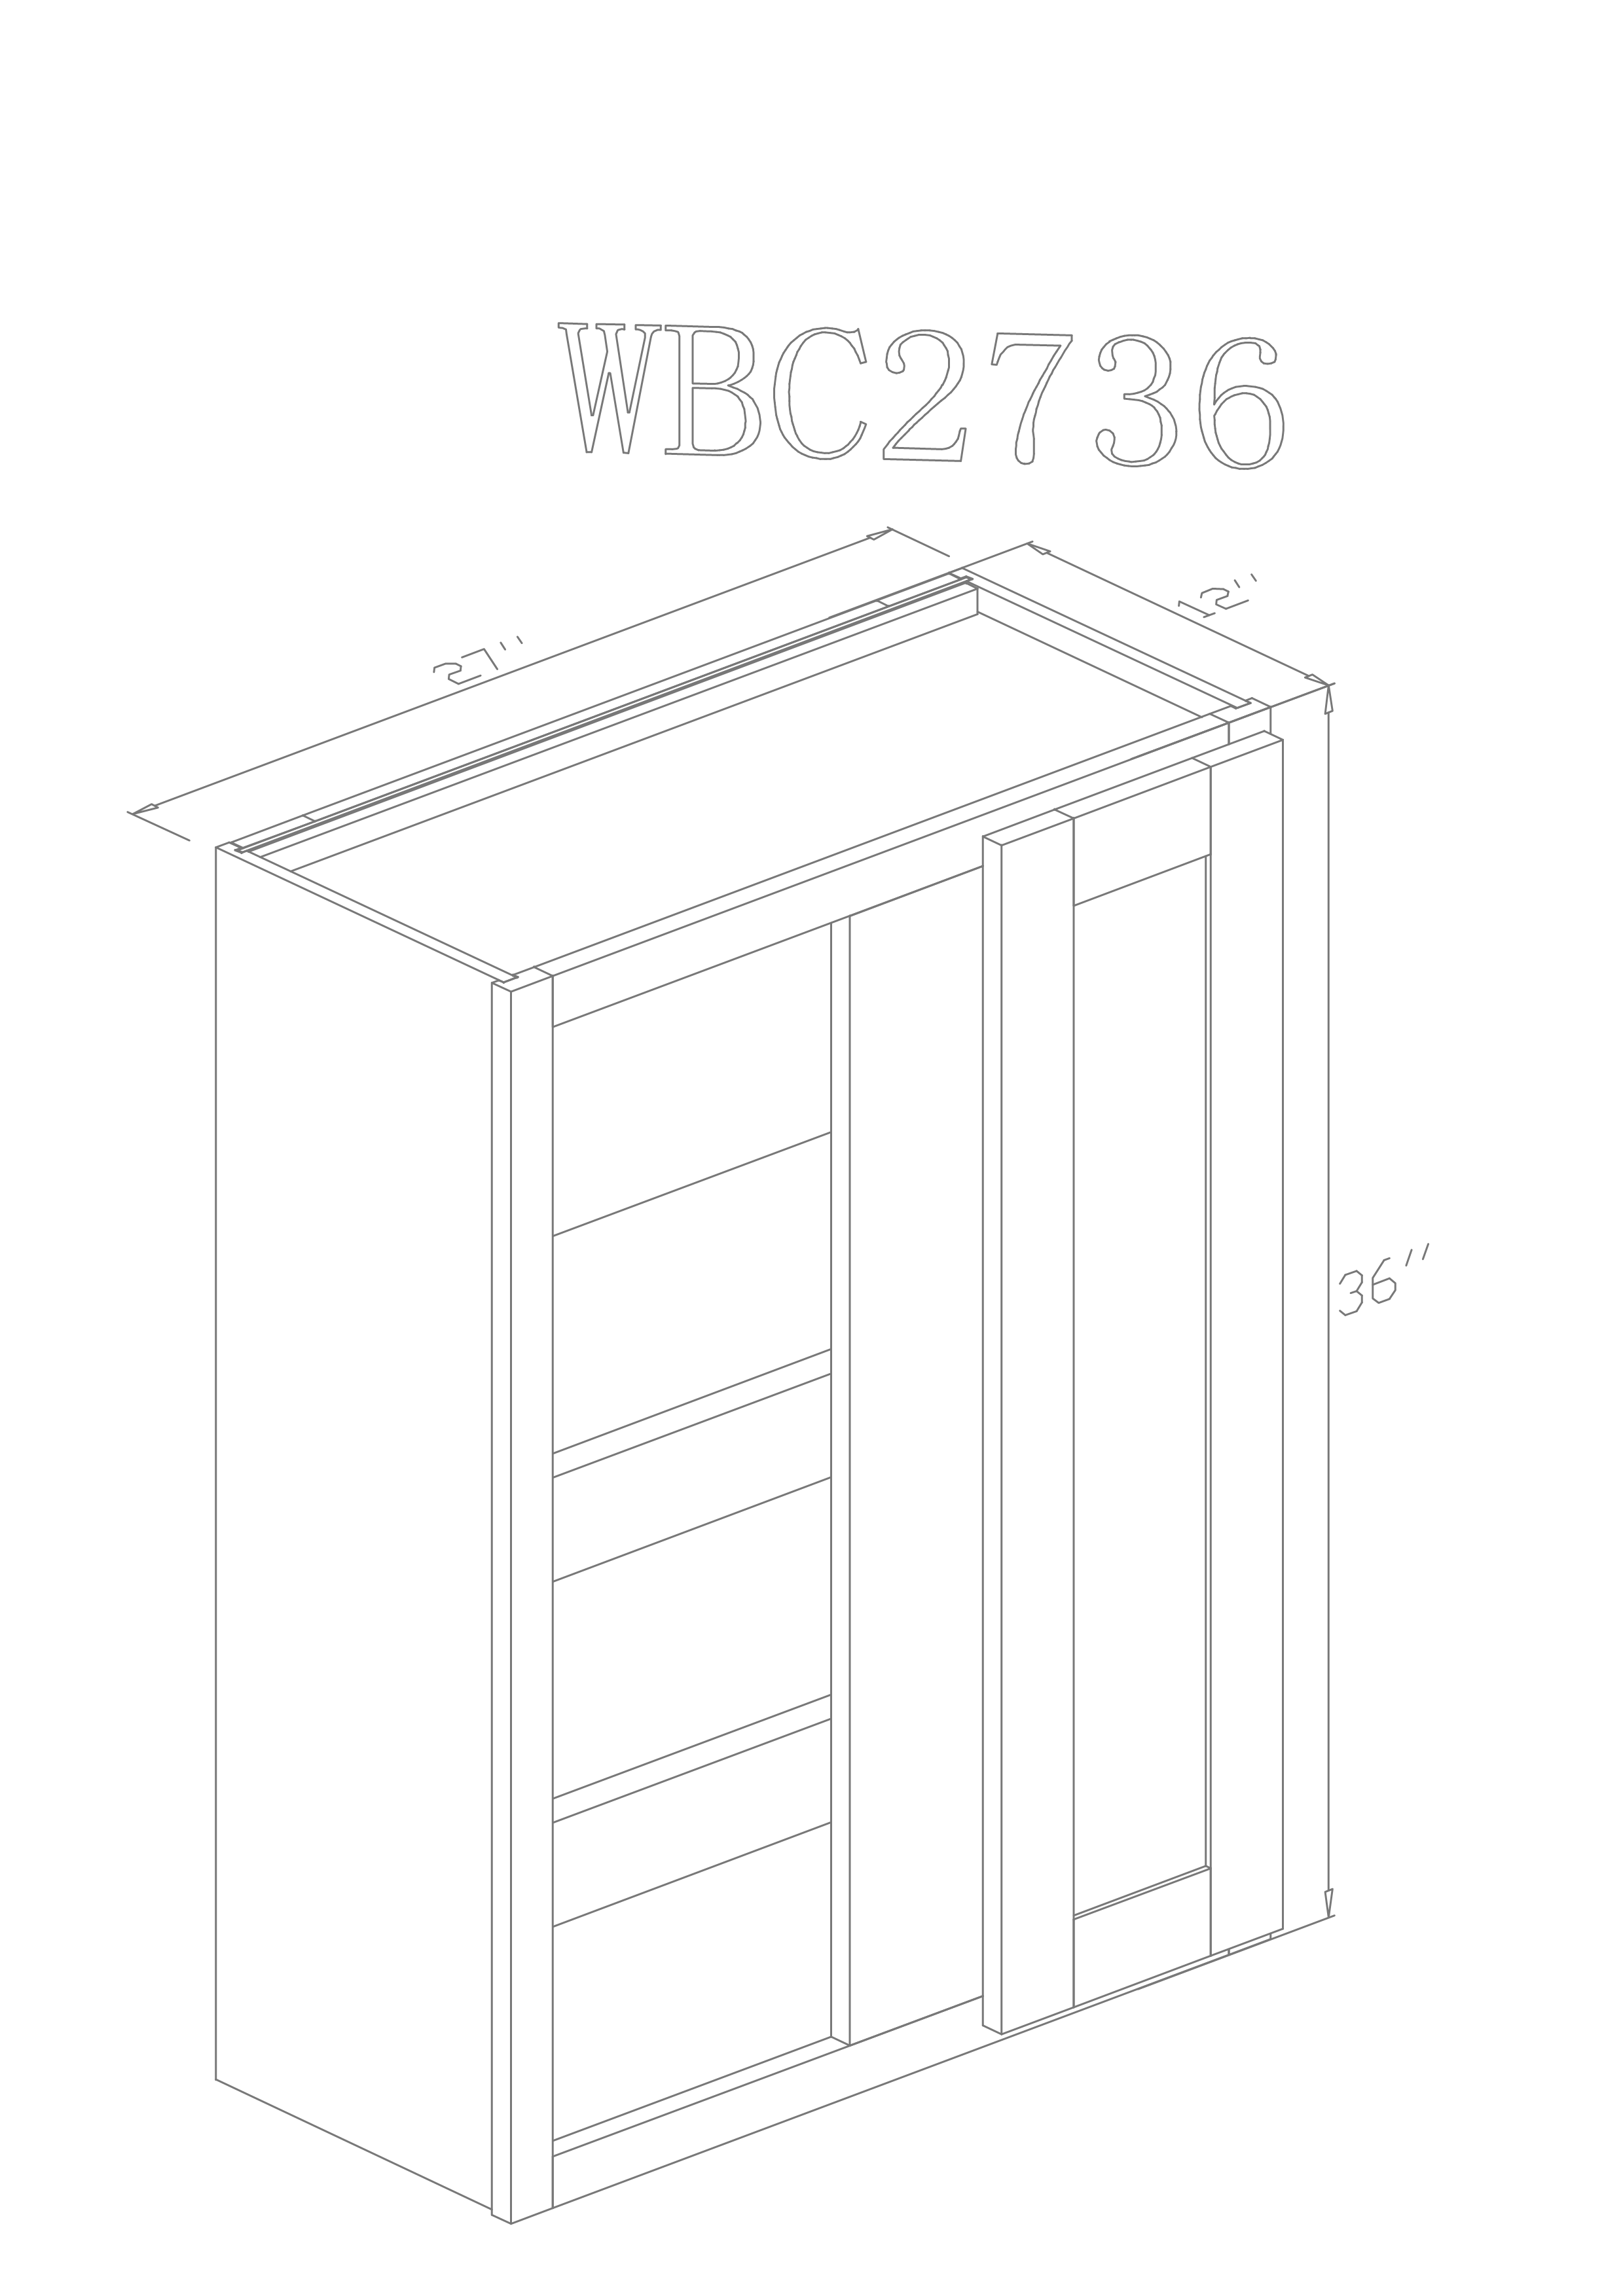 Wall 27" - Classic White 27 Inch Wall Blind Cabinet - ZCBuildingSupply